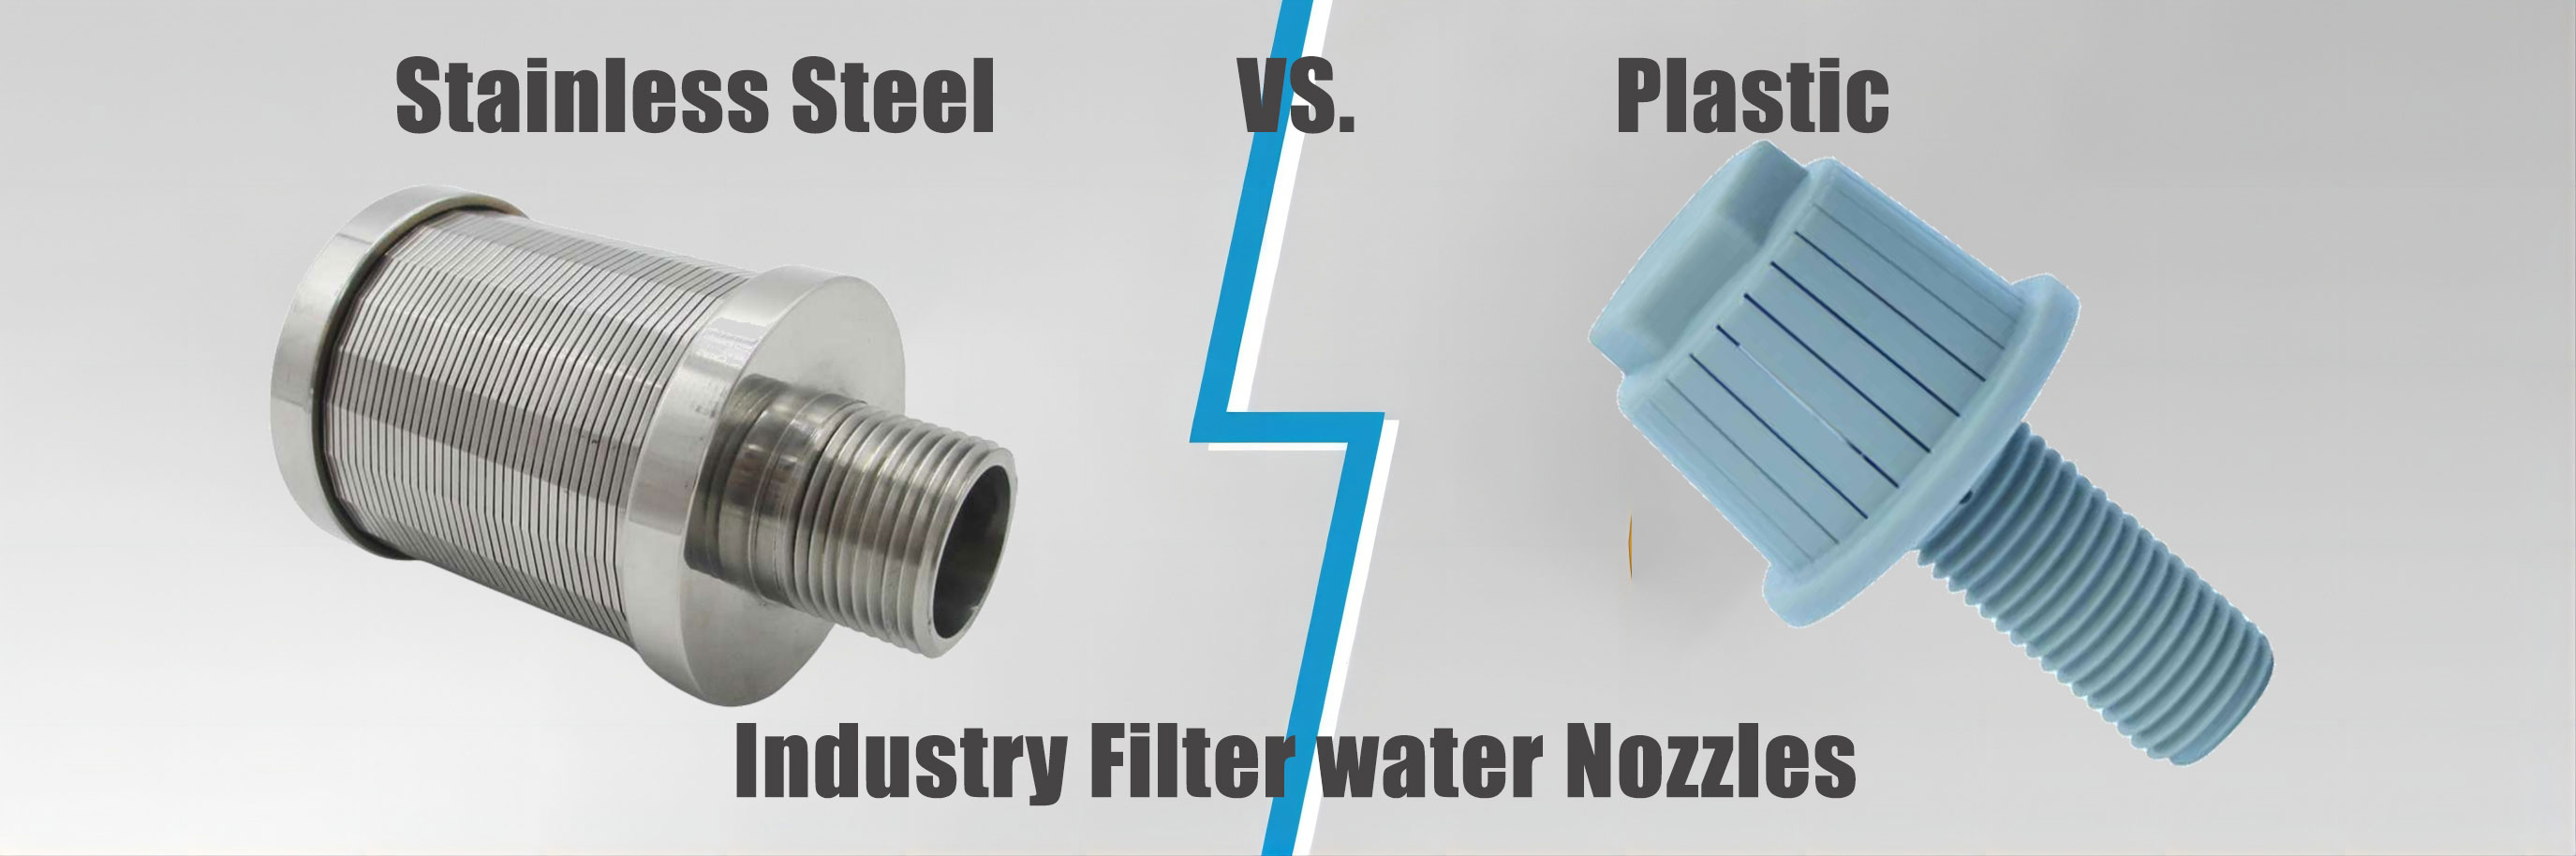 Water Filter Nozzle Stainless Steel vs. Plastic